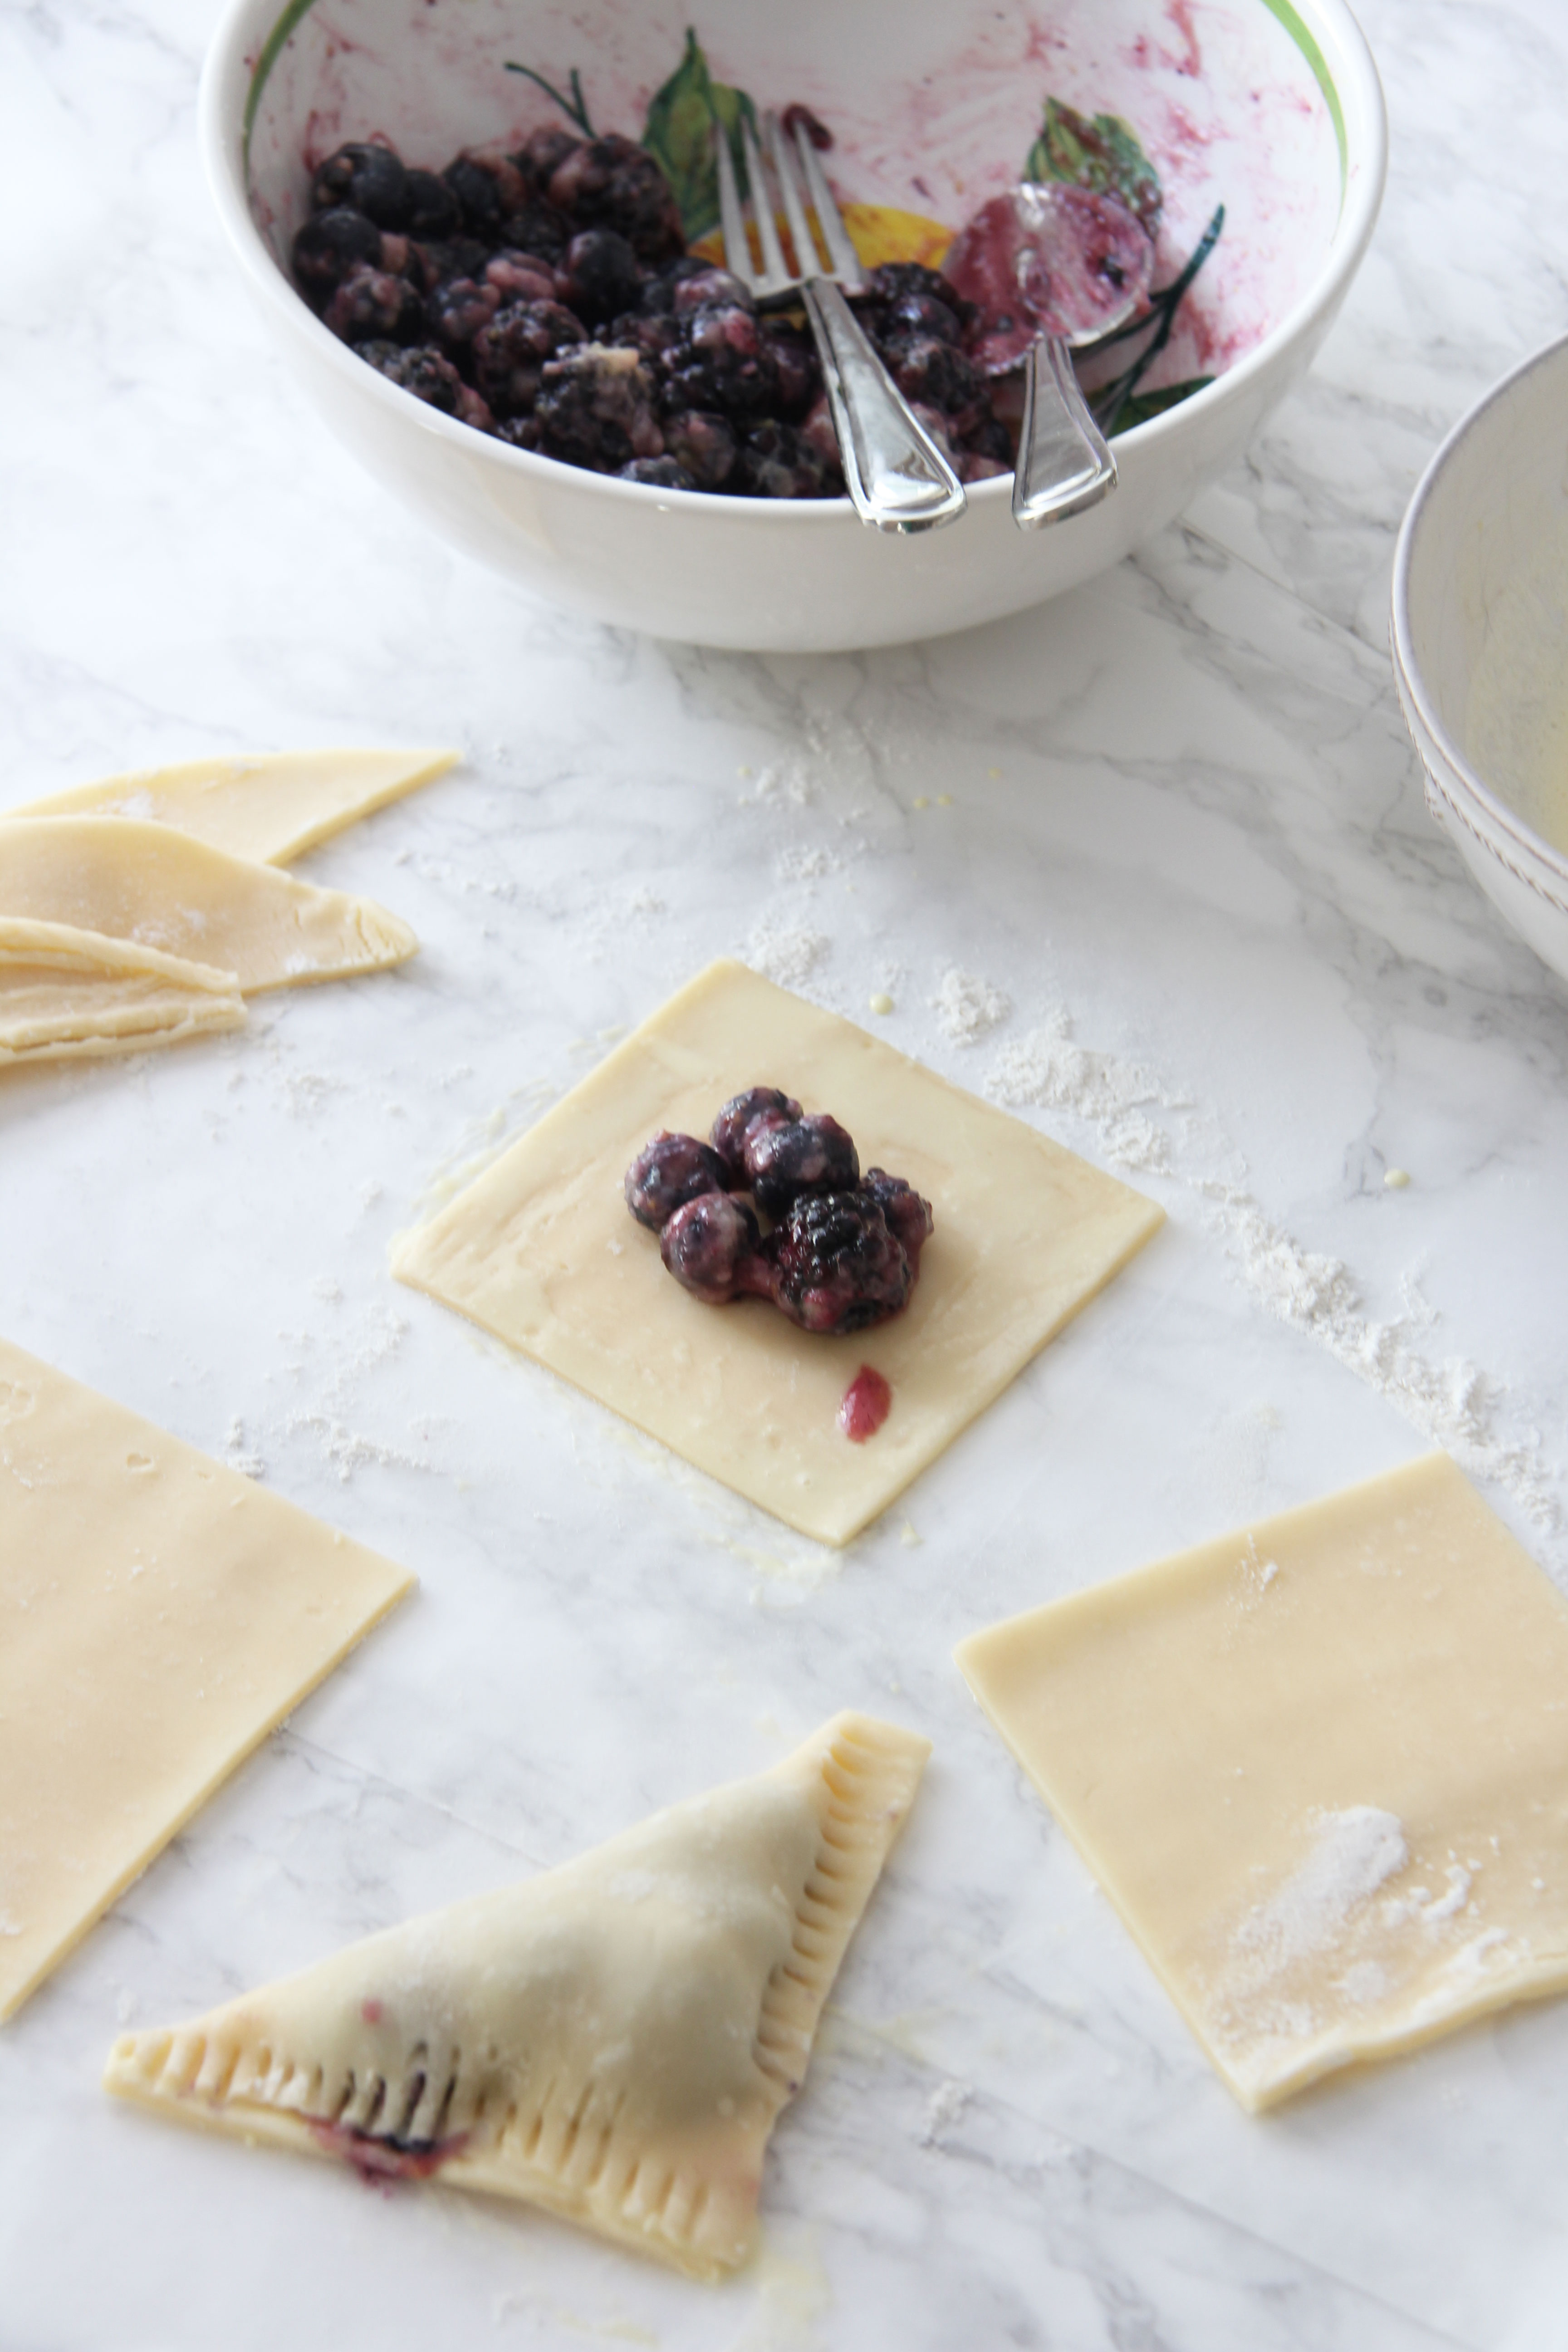 Assemble the blueberry blackberry turnovers with a spoonful of berry mixture in the middle of the pastry square. Fold over to make turnover.